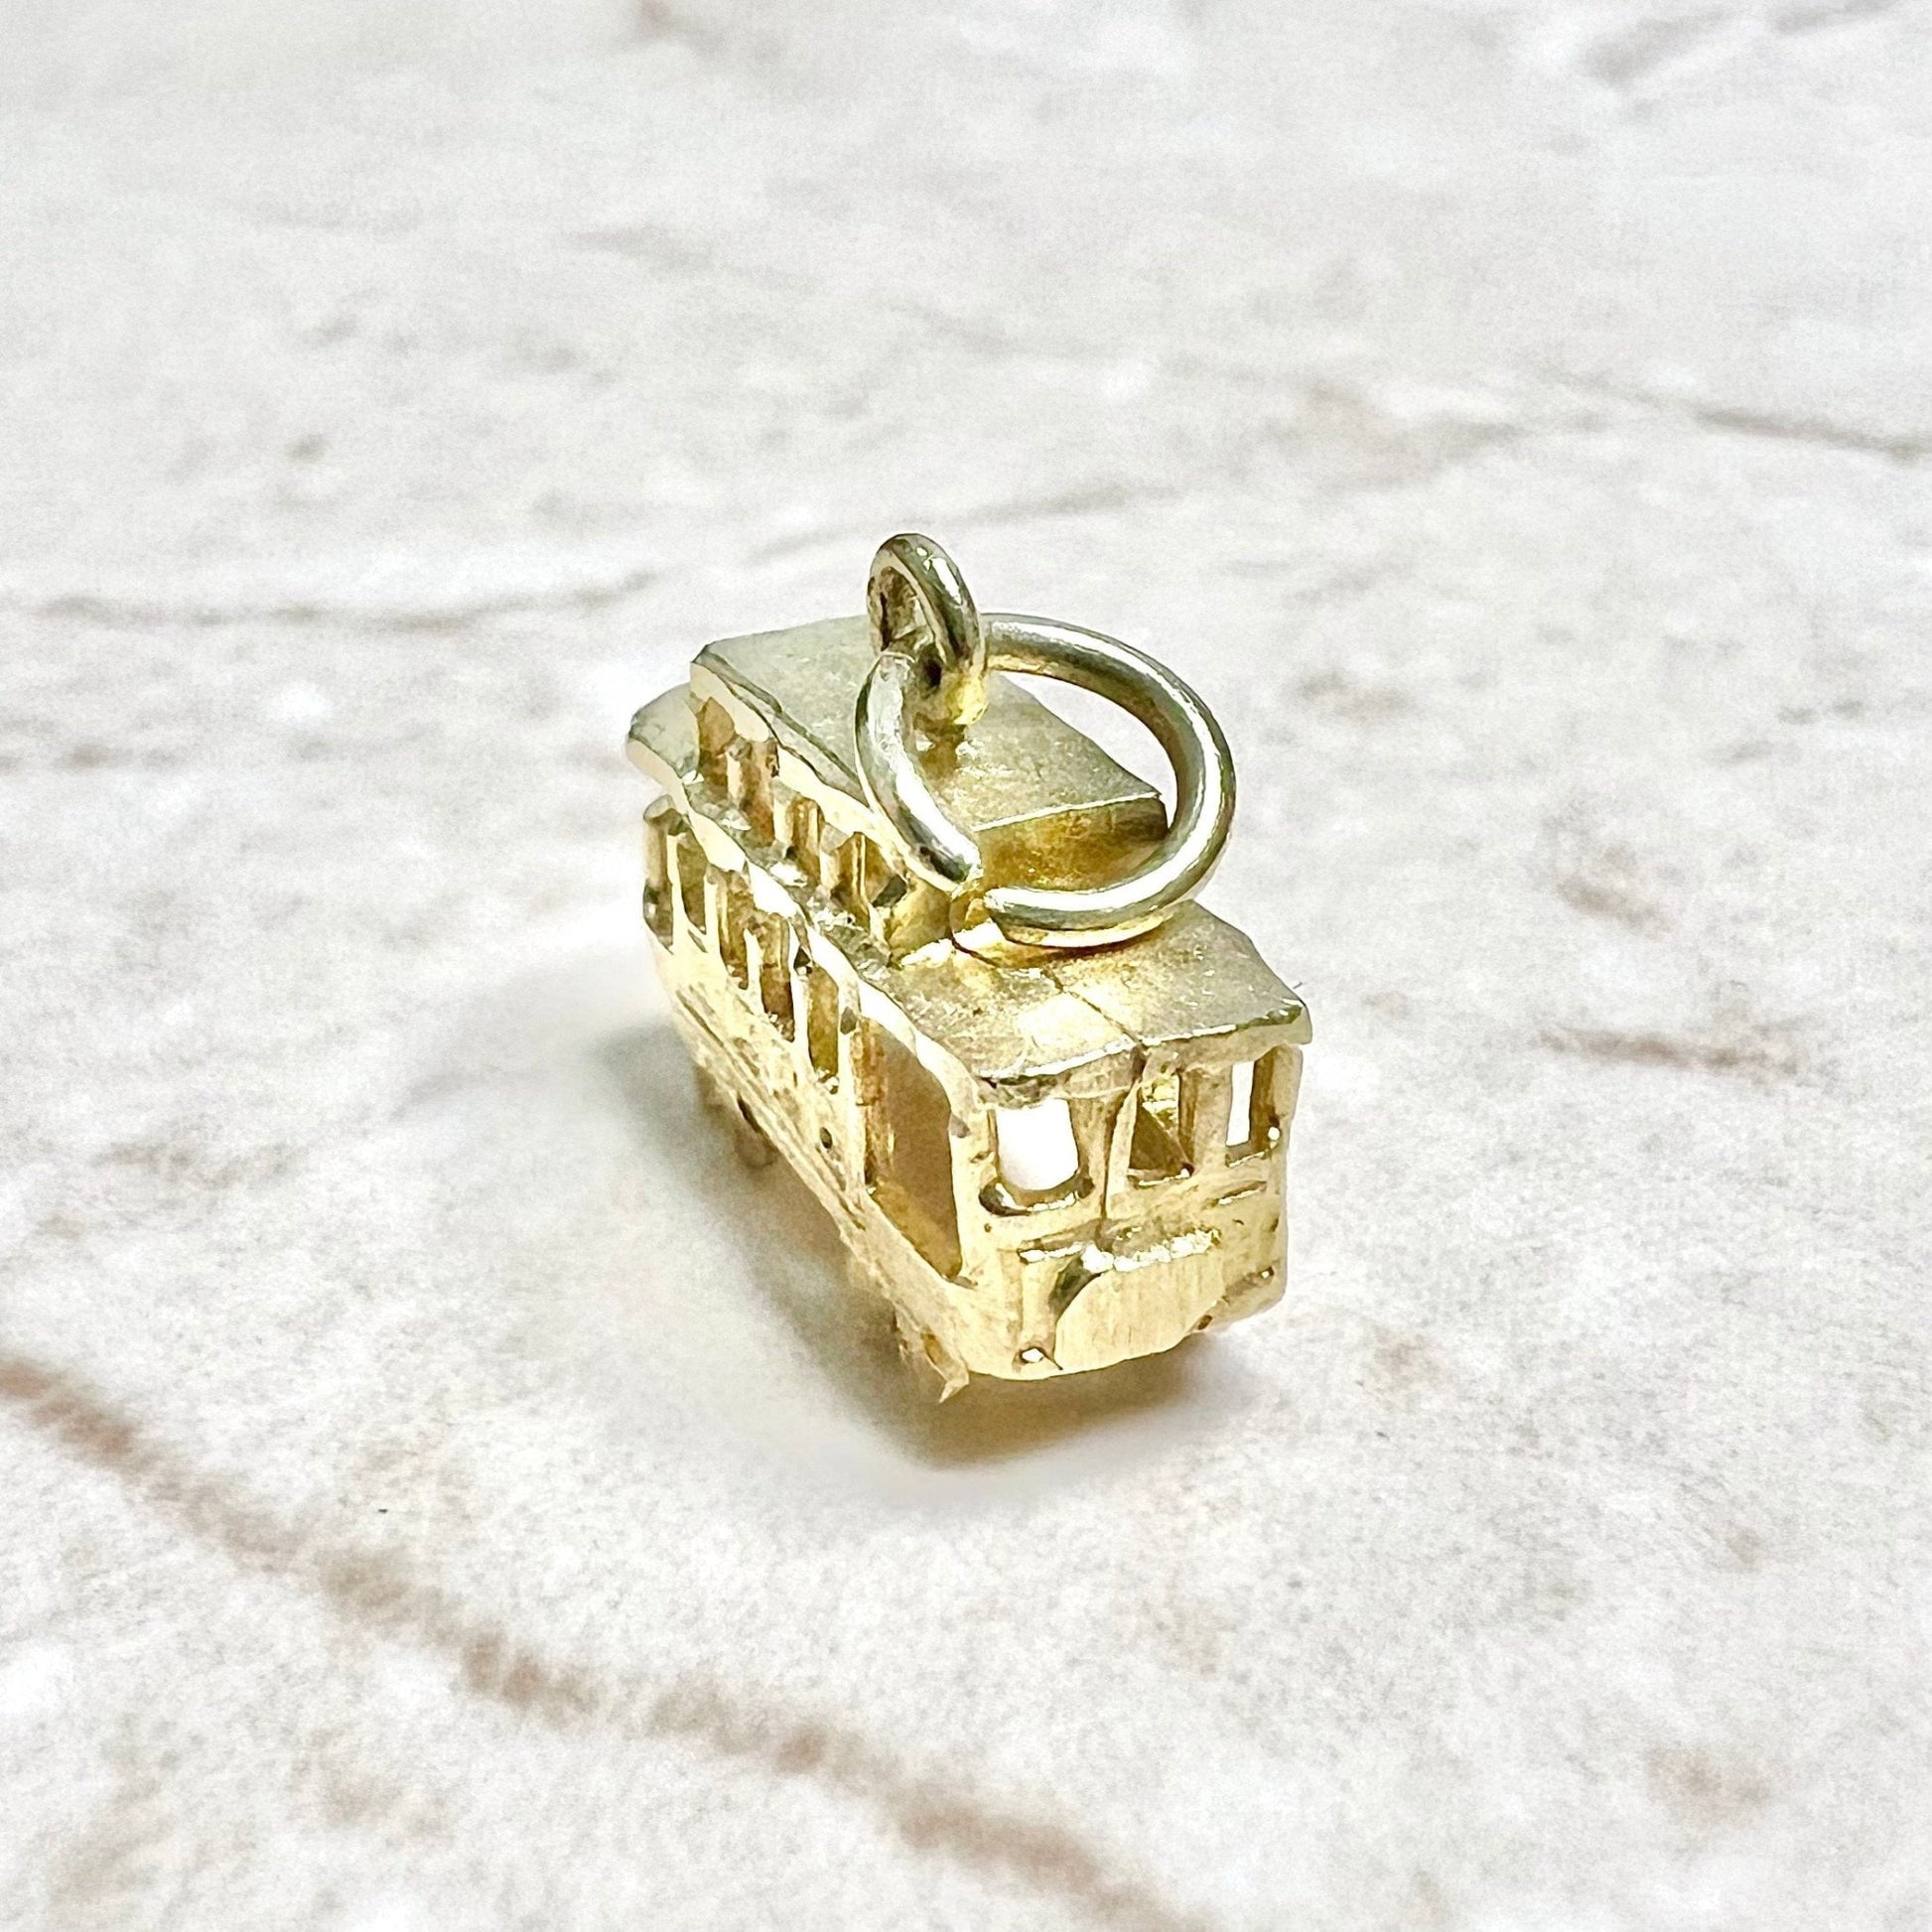 Vintage 14K Yellow Gold San Francisco Cable Car Charm - WeilJewelry